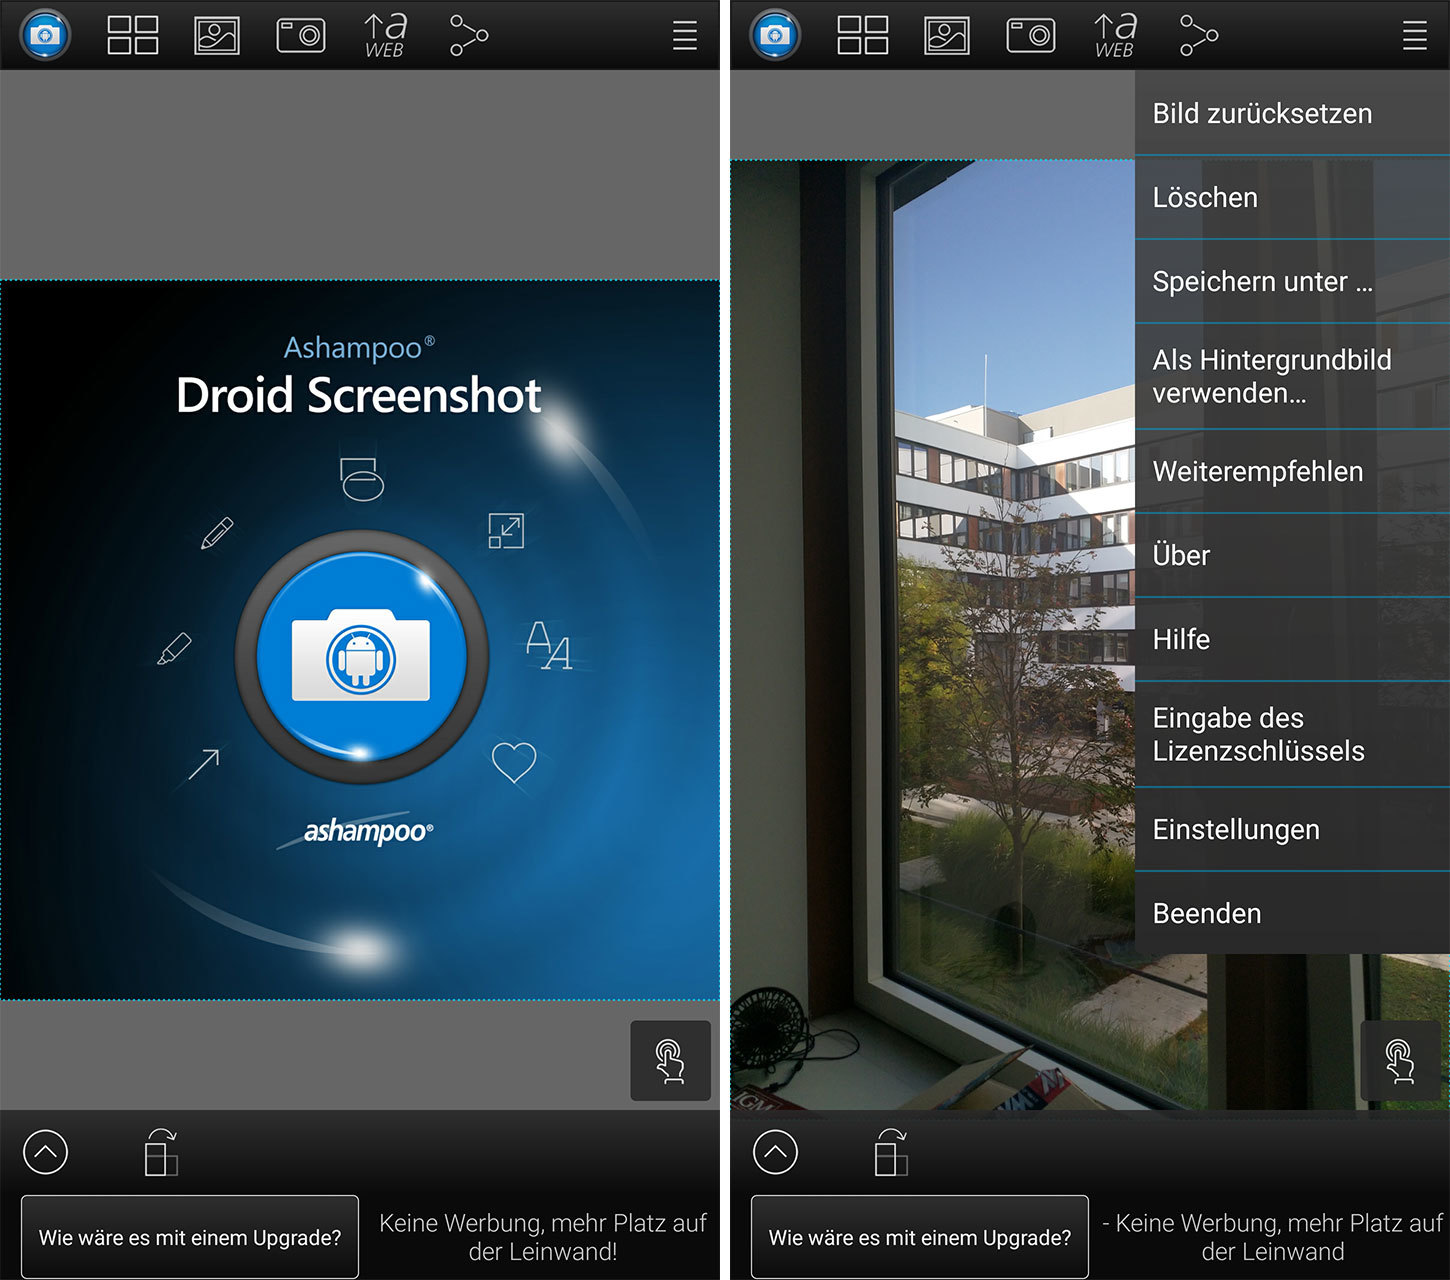 droid havij app download for android